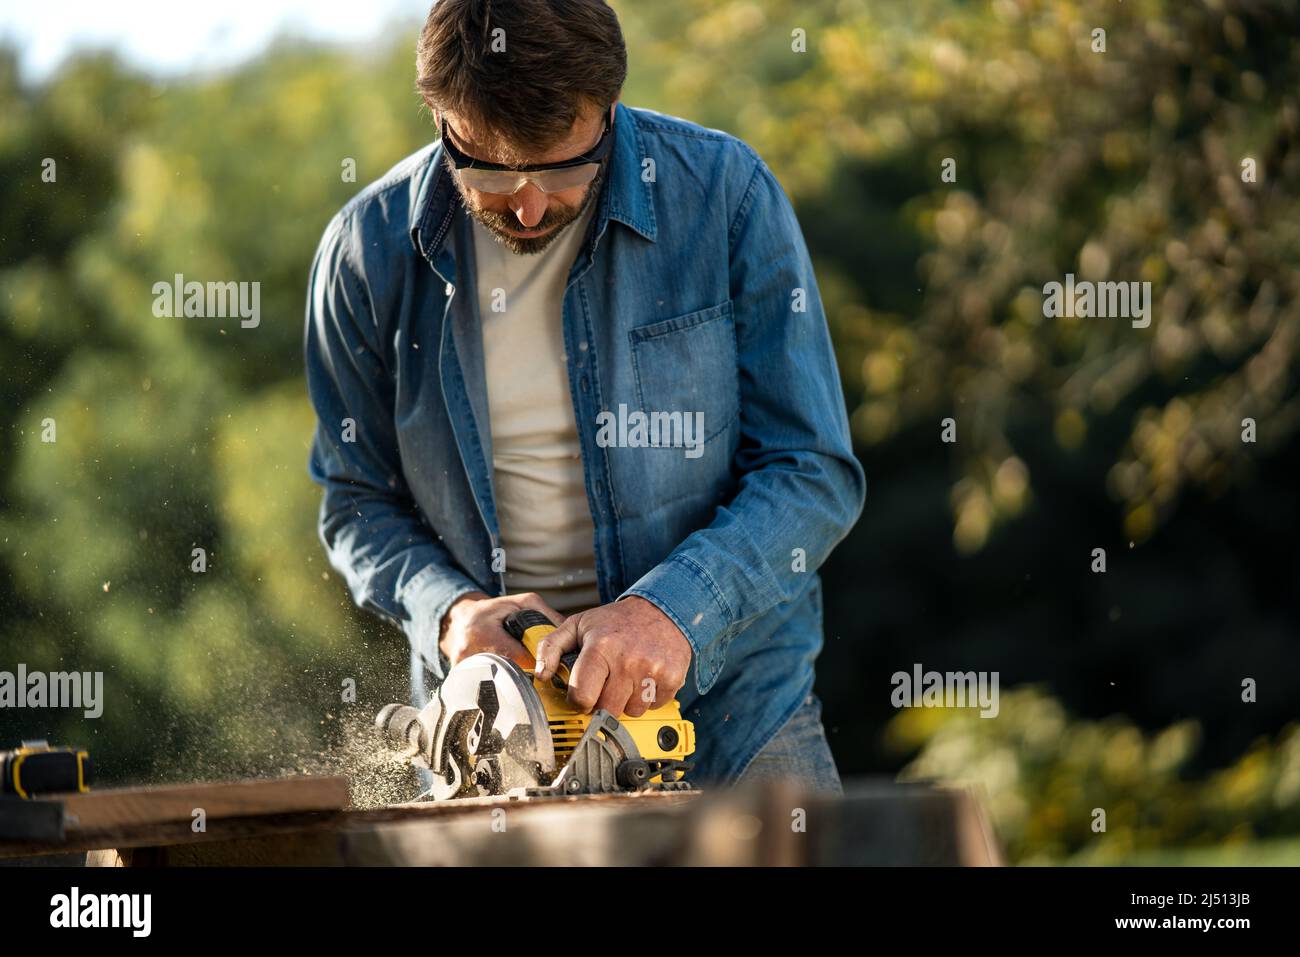 Craftsman working with circular saw at construction site Stock Photo